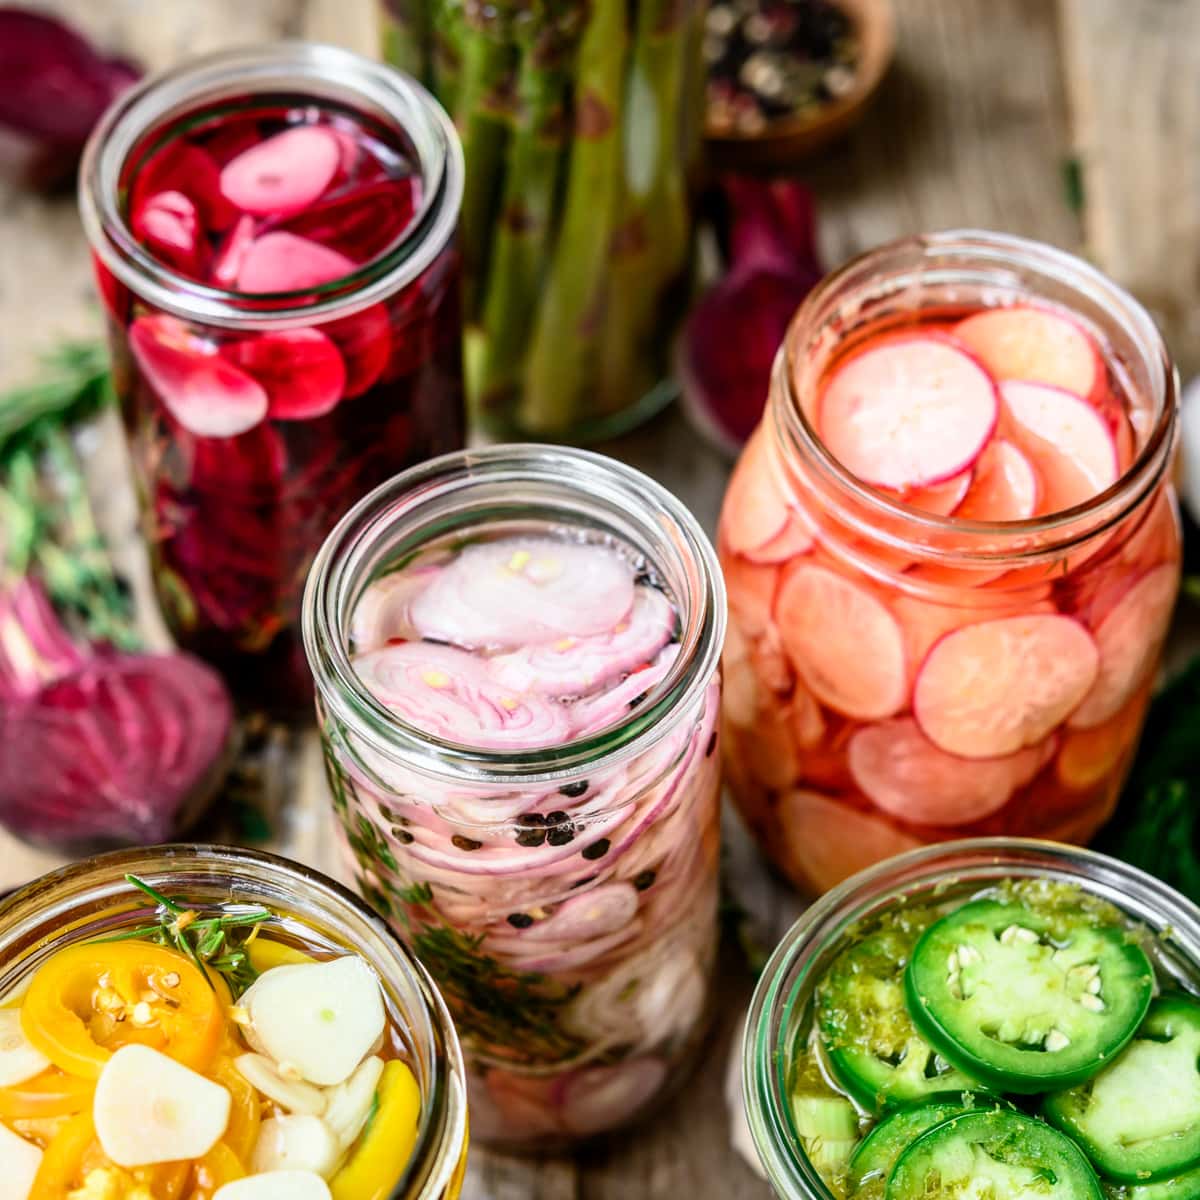 A Guide to Making Quick Pickles at Home | Crowded Kitchen